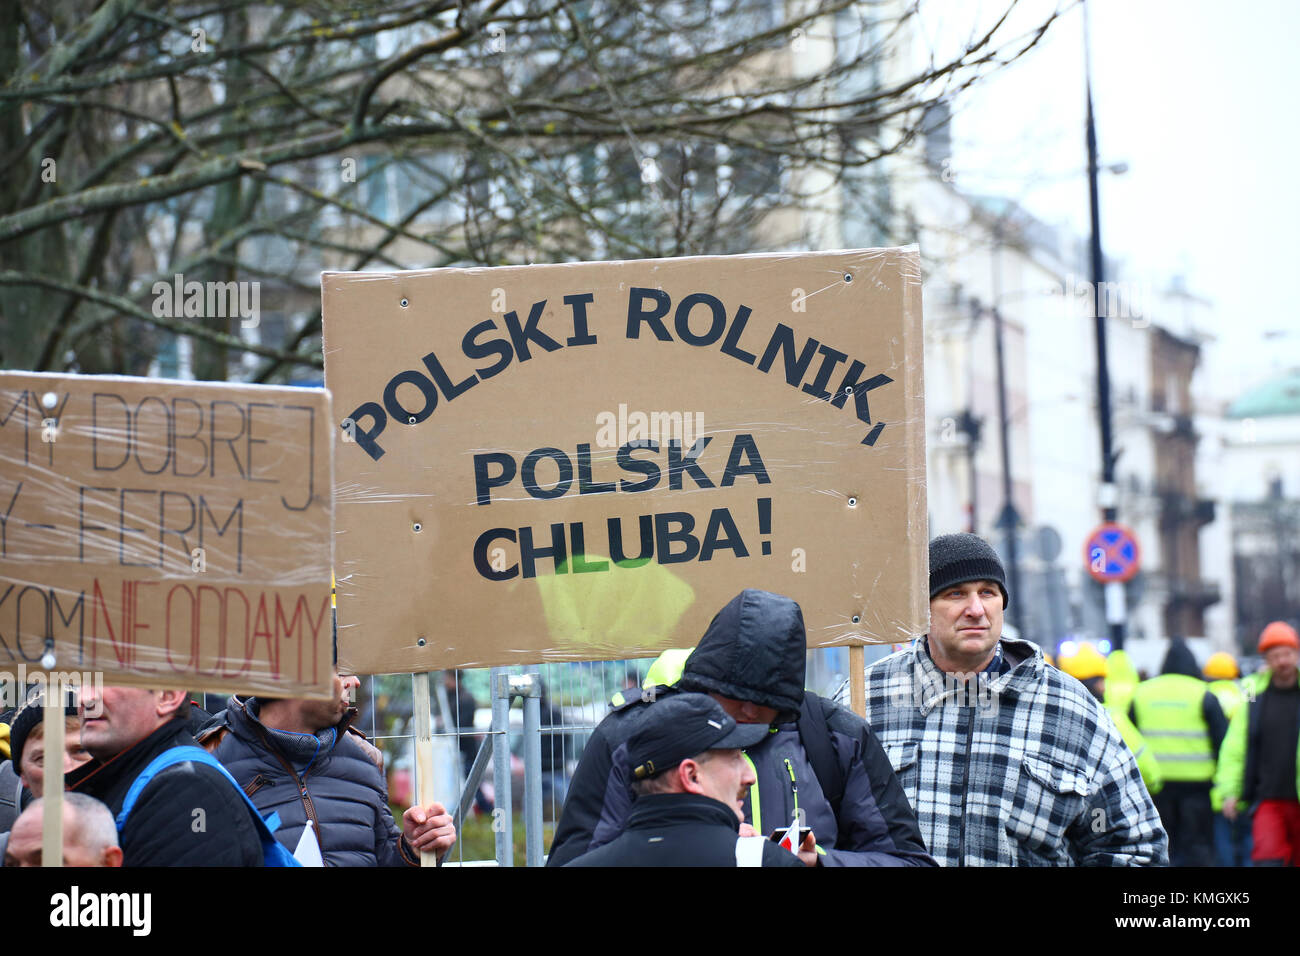 Warsaw, Poland. 08th Dec, 2017. Poland, Warsaw, 8th December 2017: Hundreds of mink farmers block parliament (Sejm) against cutting in their breedings in fear of losing work and financial crisis. Credit: Jake Ratz/Alamy Live News Stock Photo